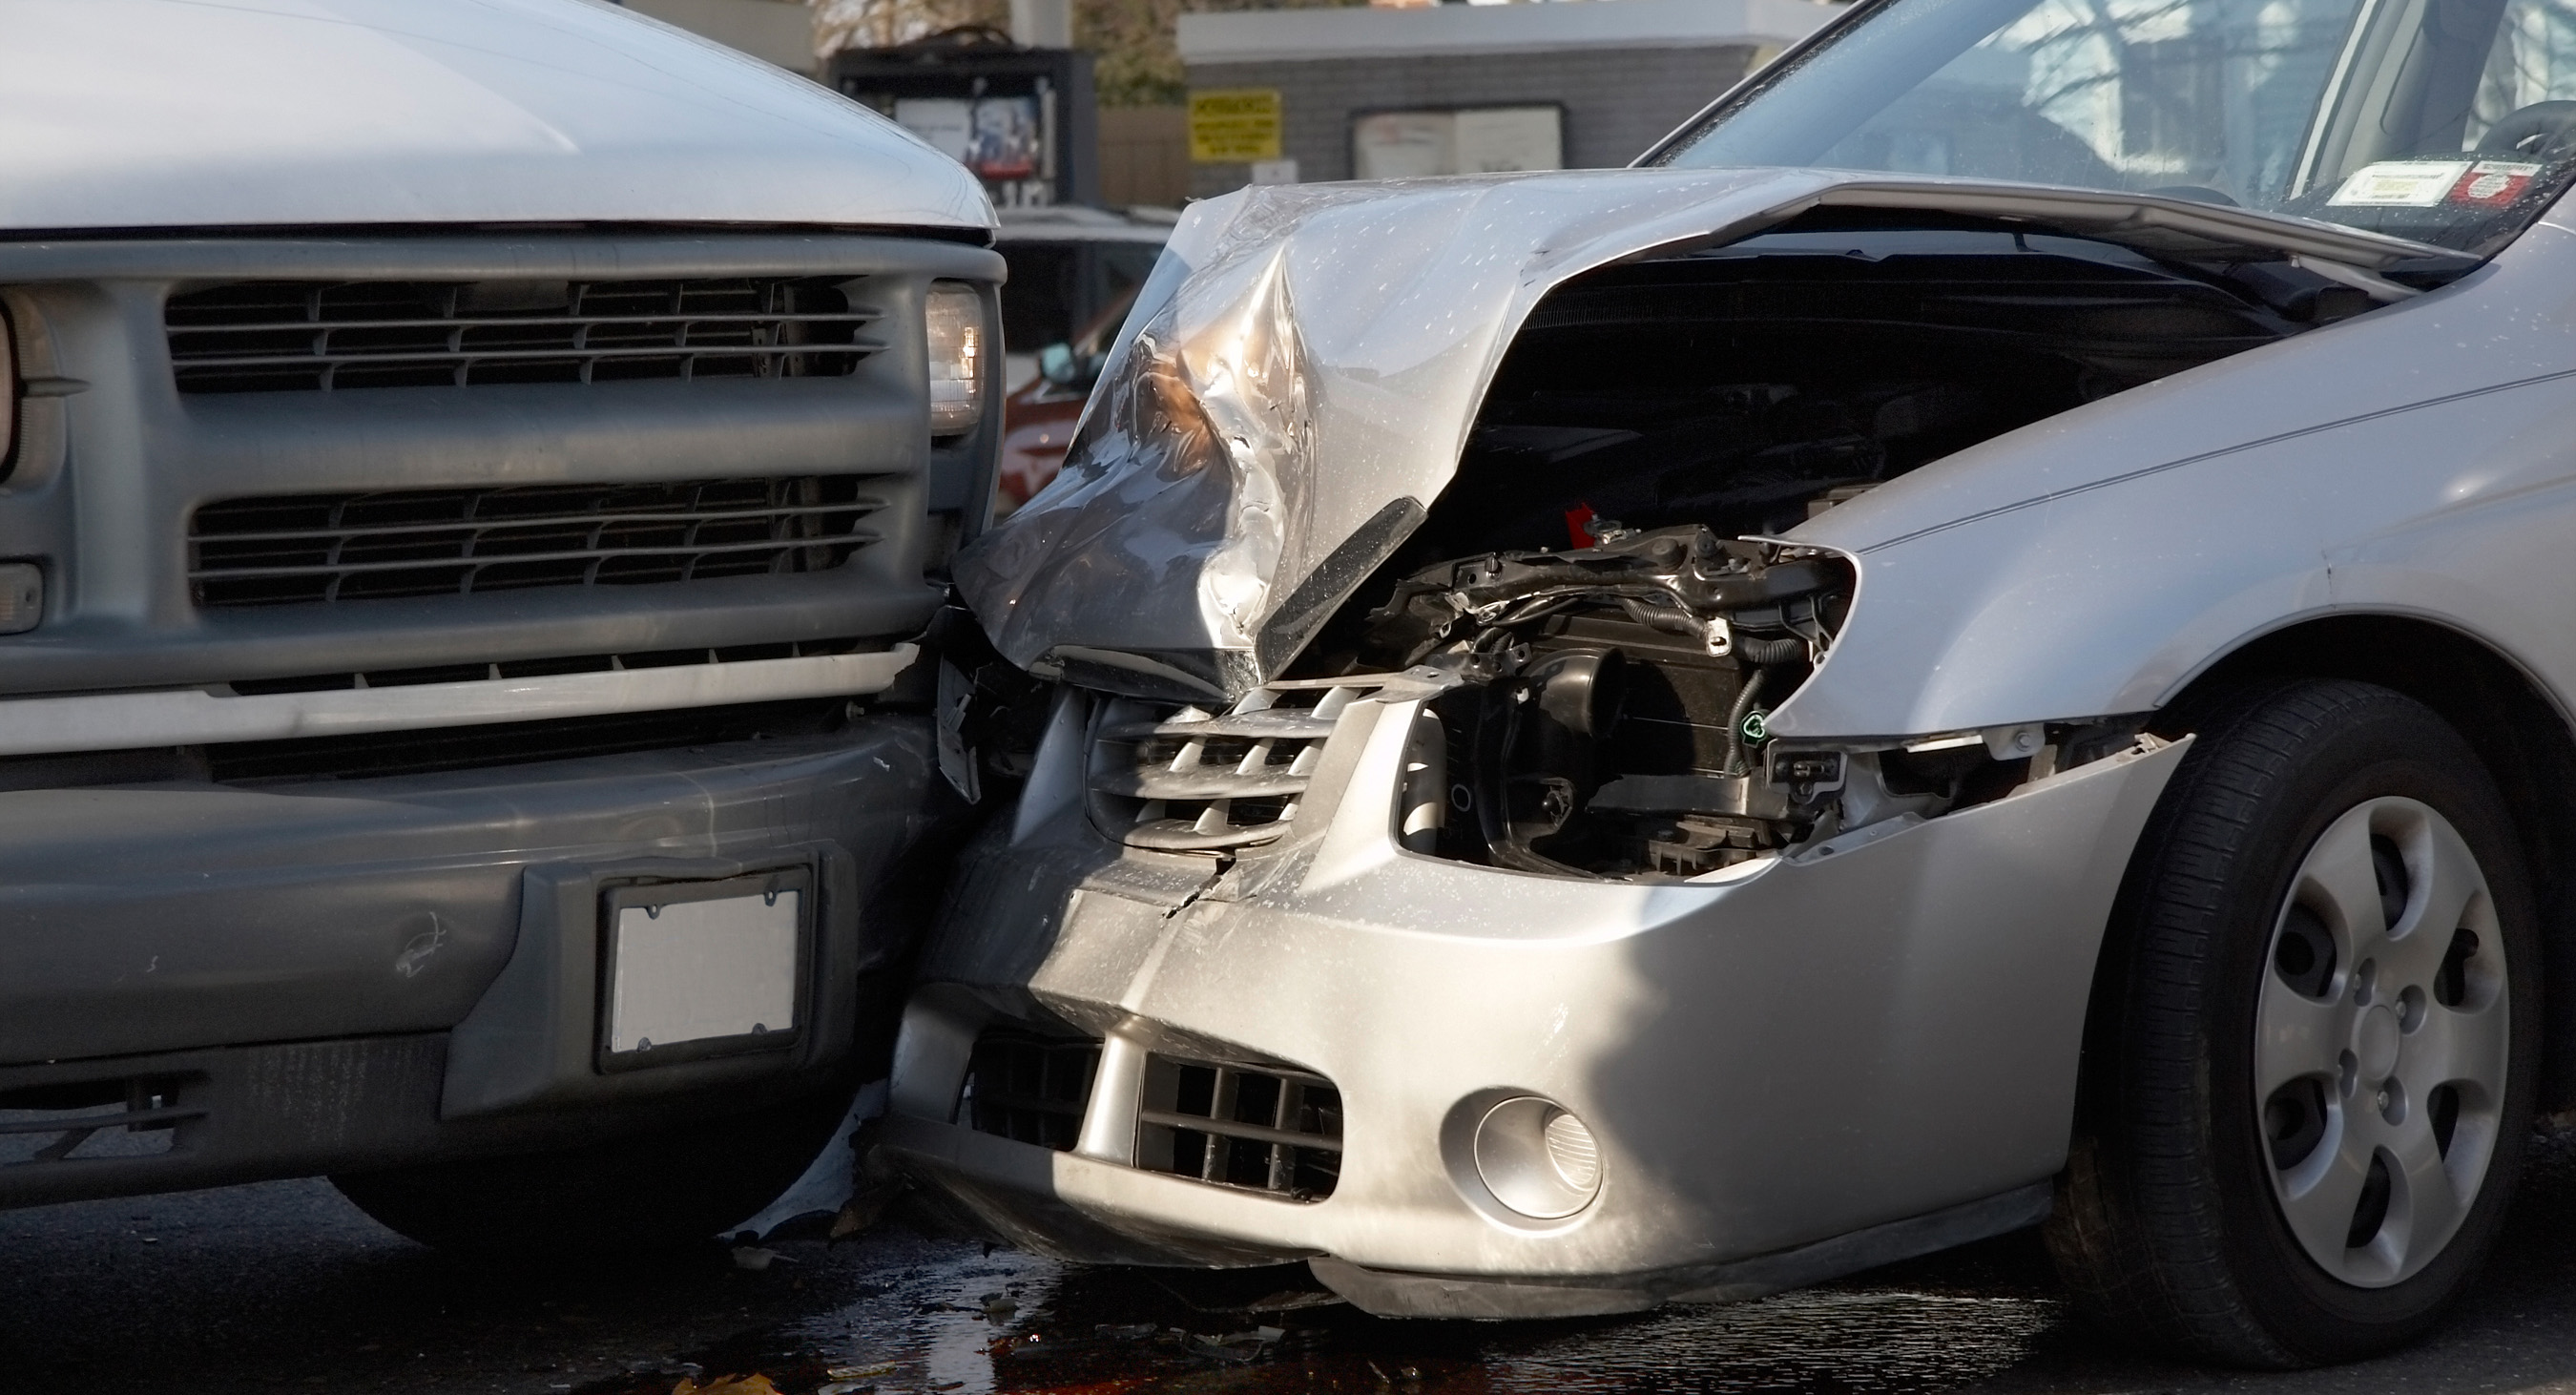 An accident between a van and car that requires front-impact collision repair in Colorado Springs.